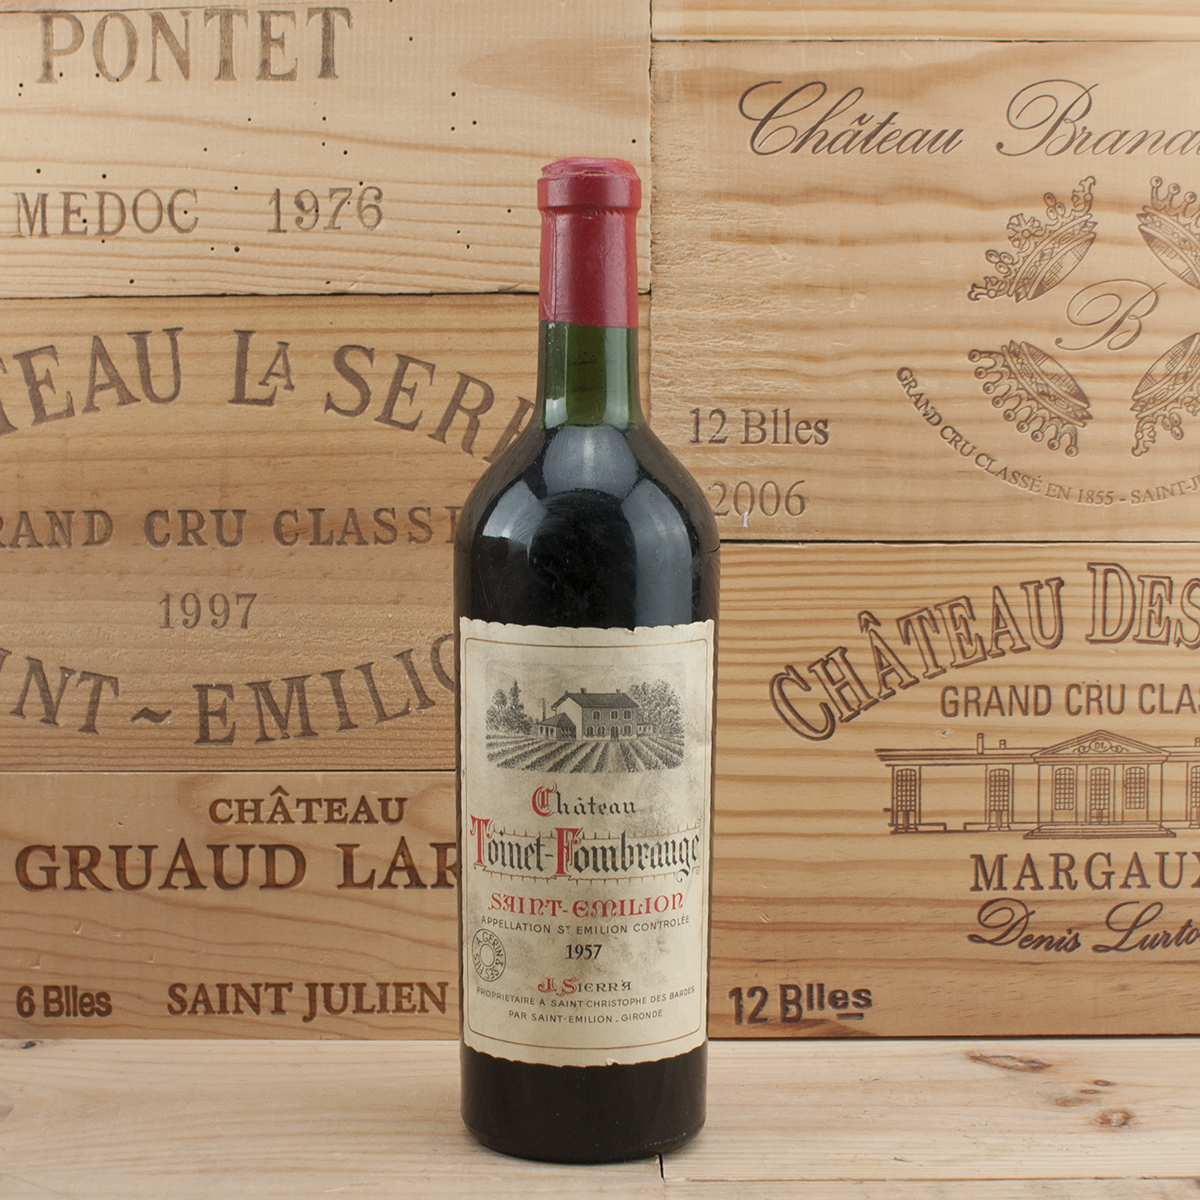 1957 Chateau Toinet Fombrauge